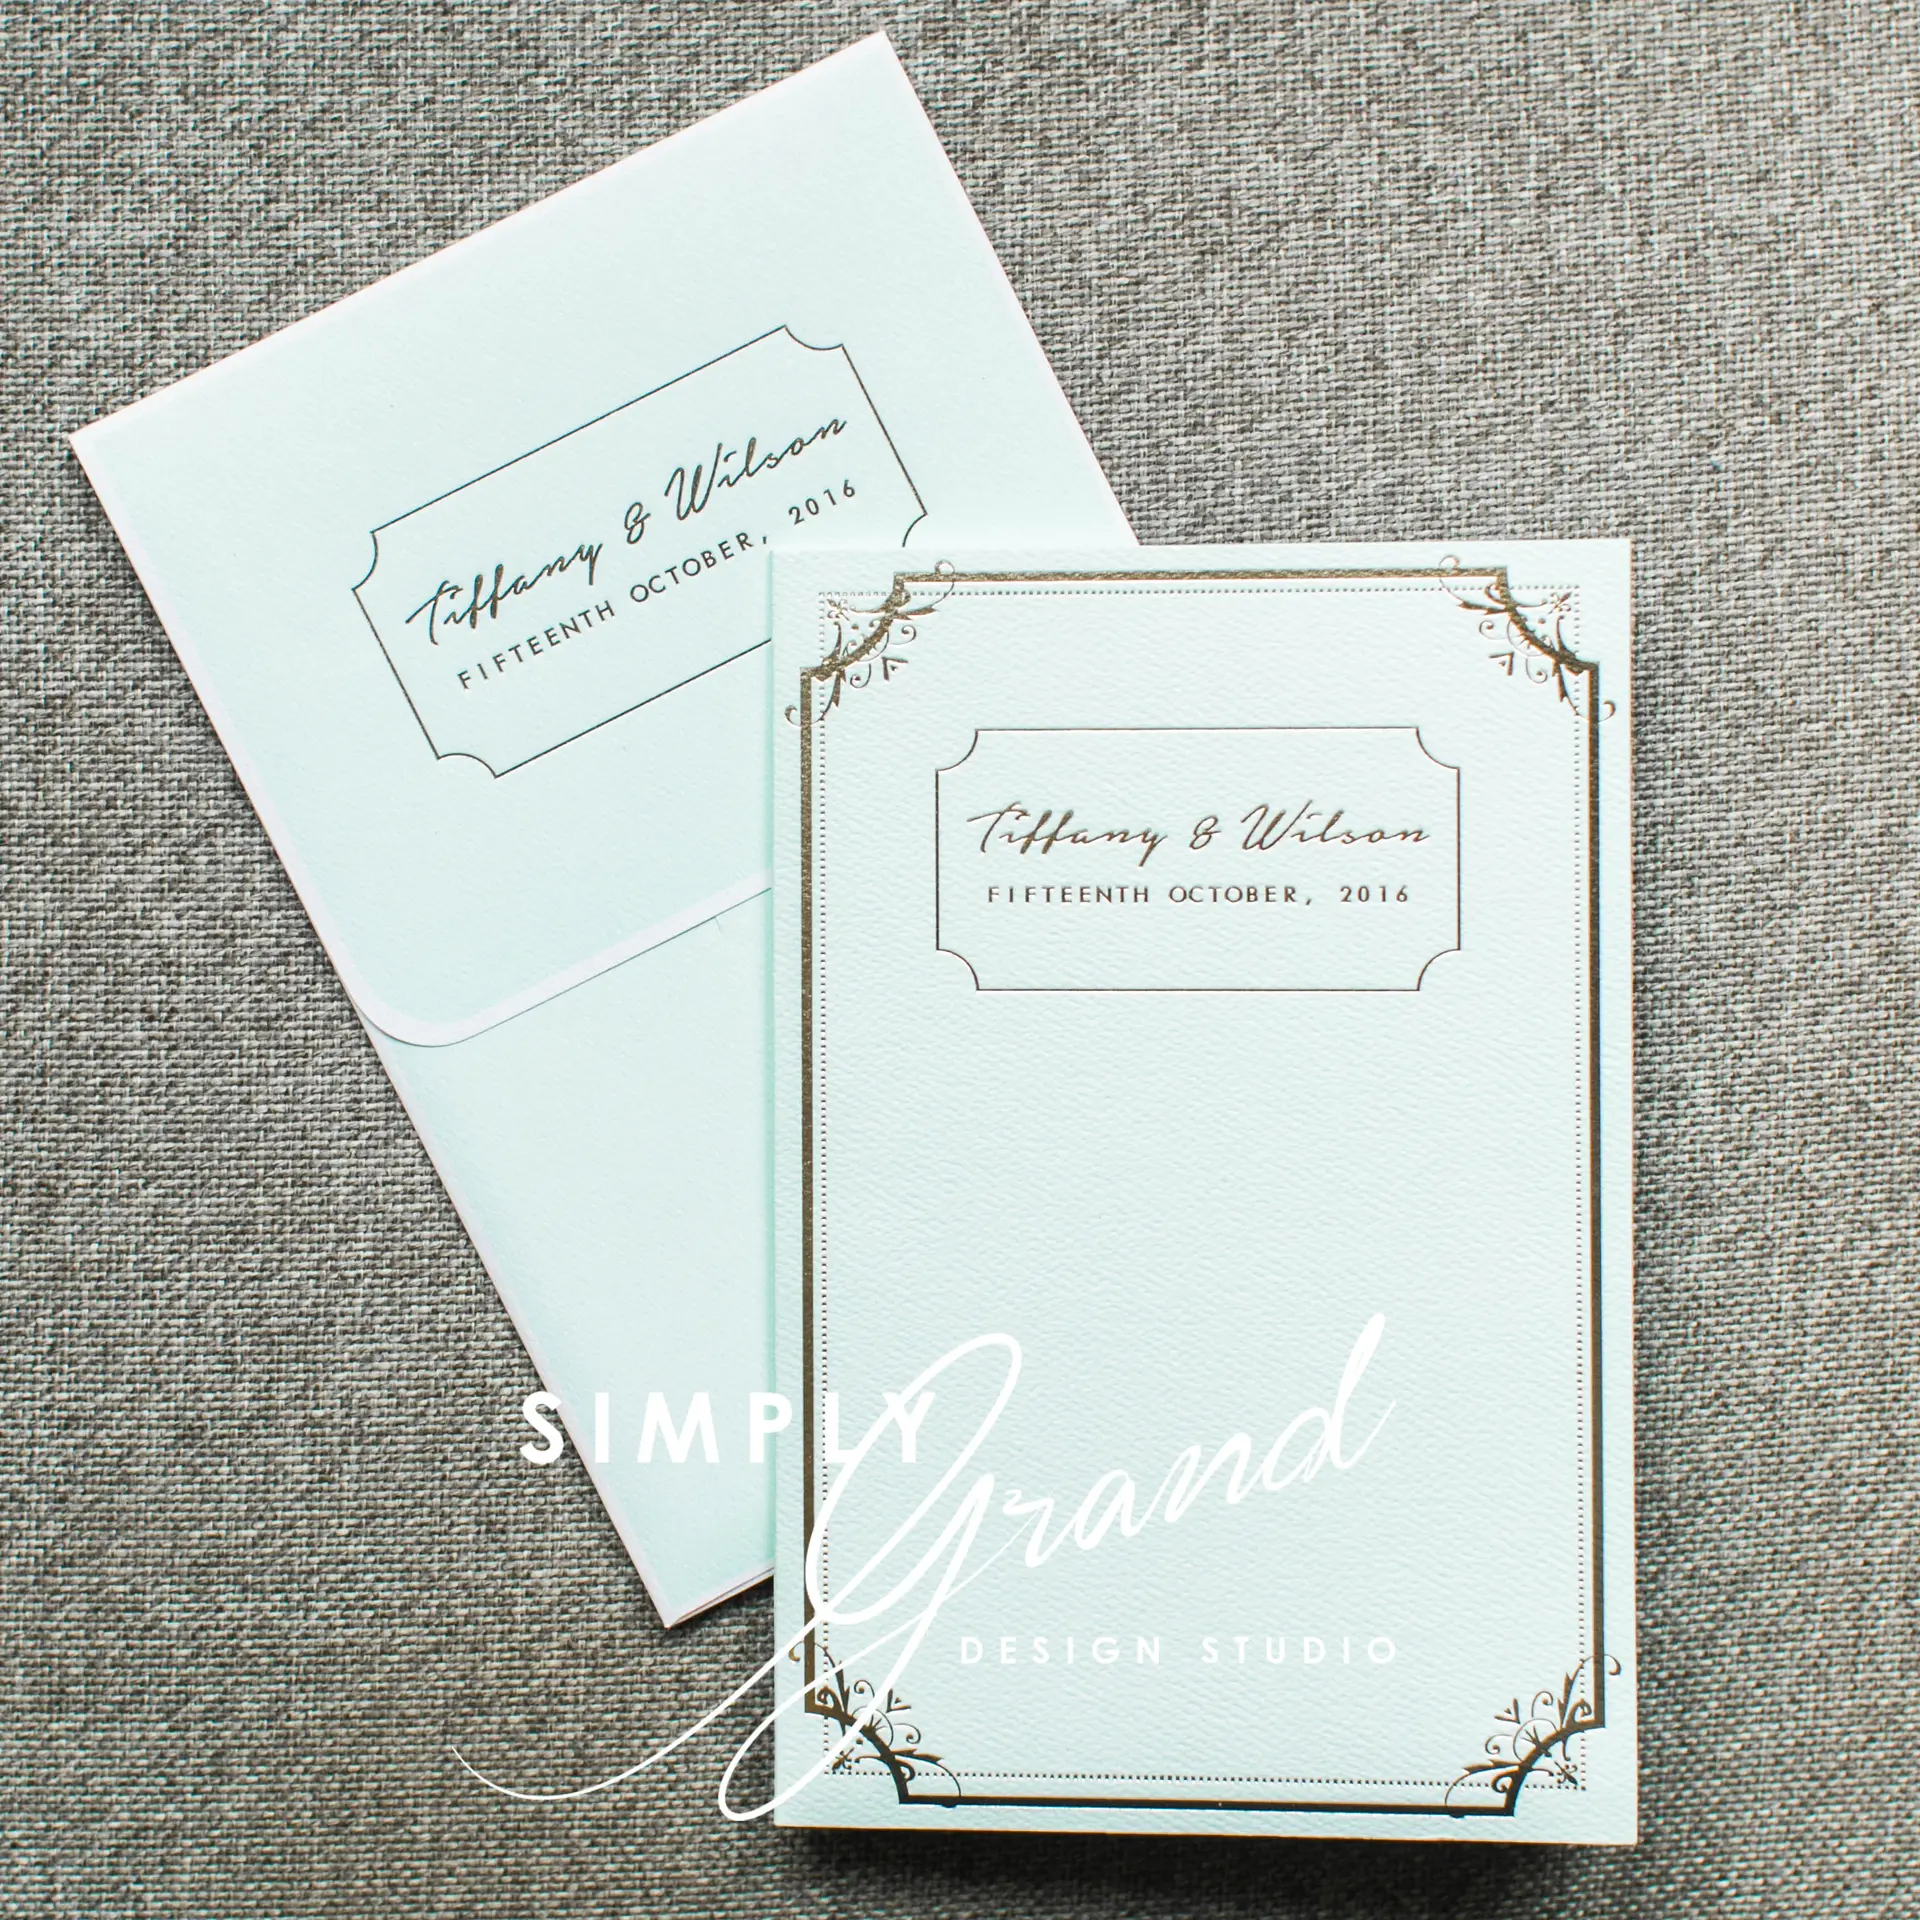 Simply_Grand_Production_Stationery_Invitation_Card